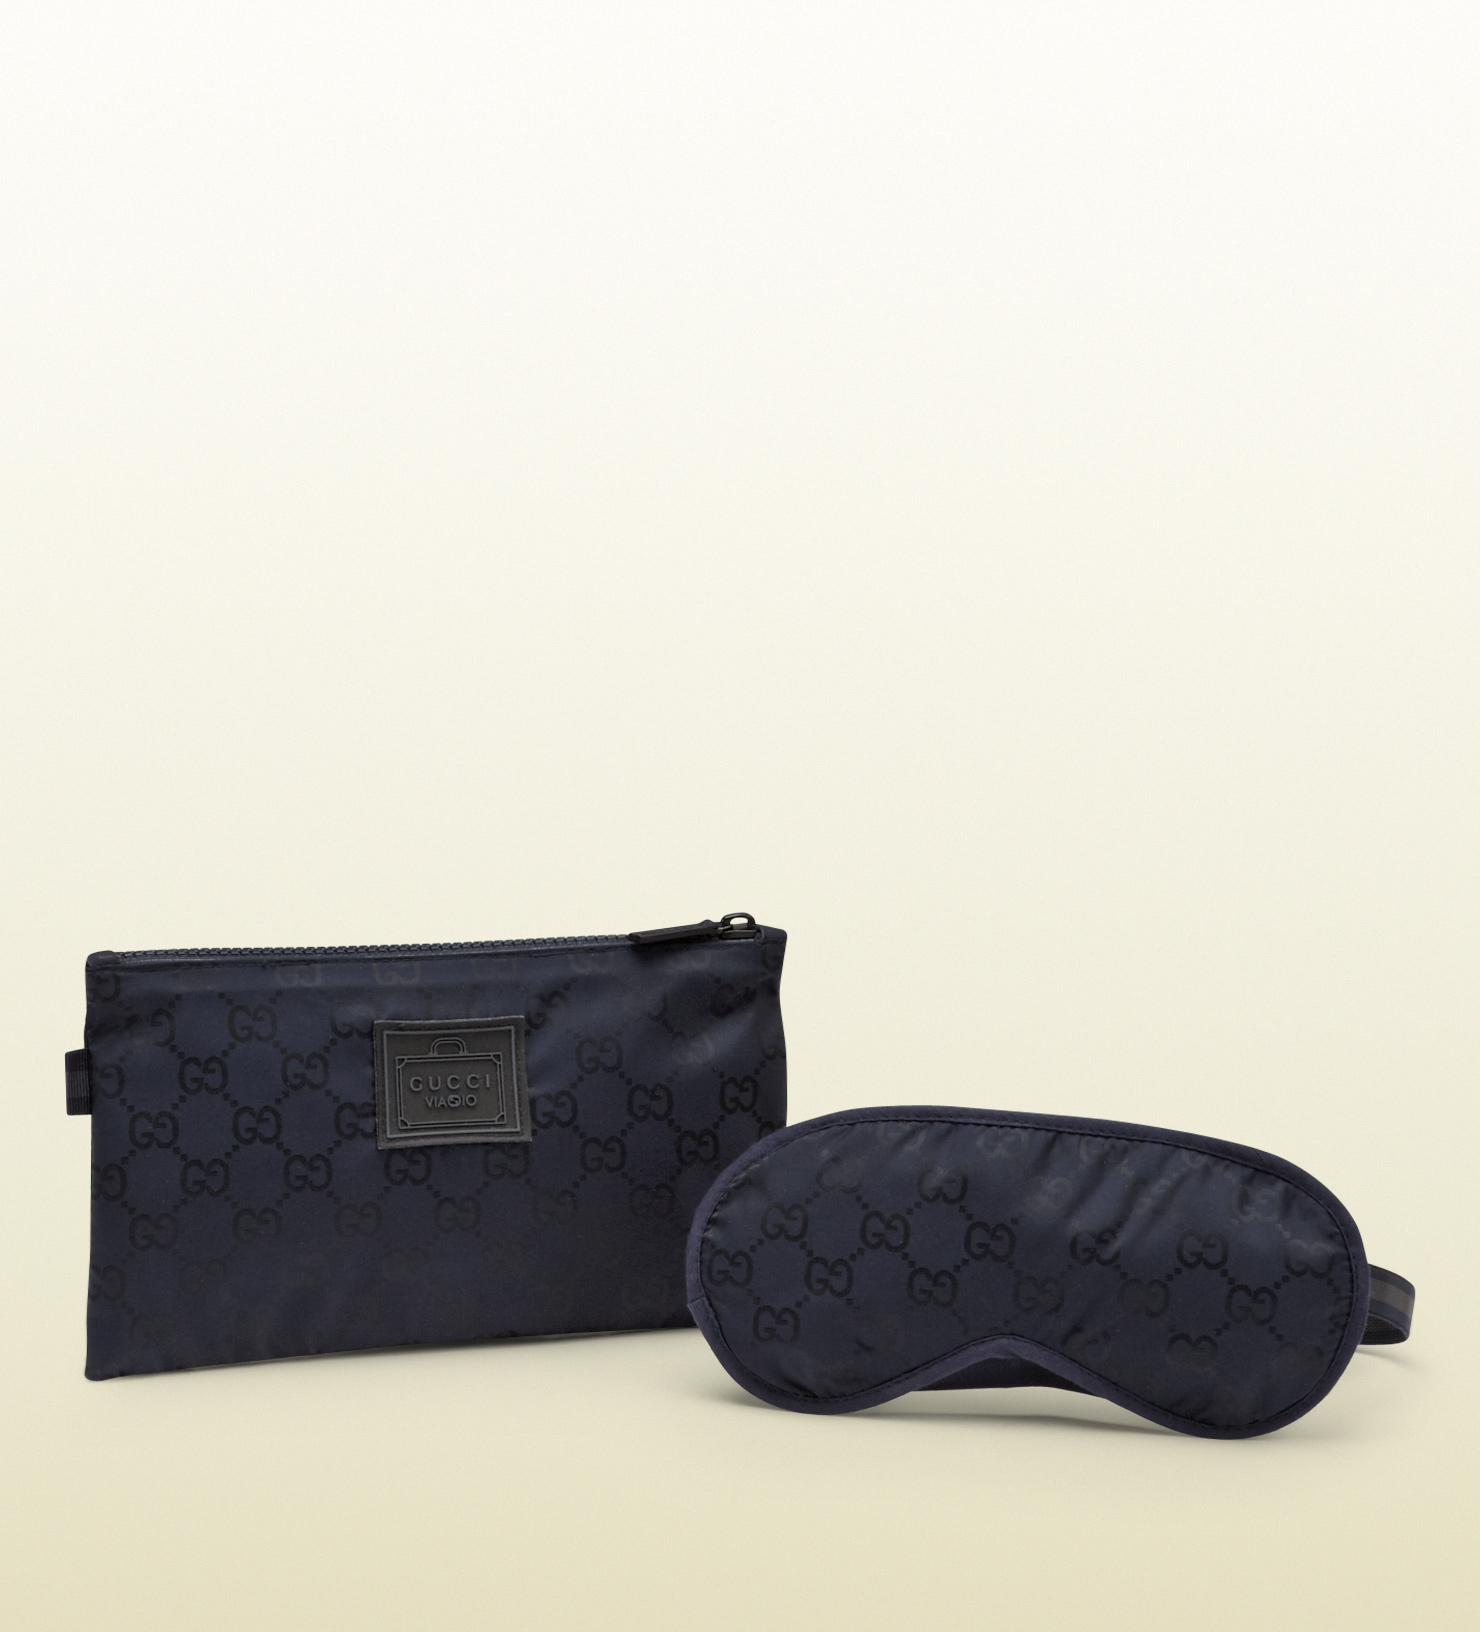 Gucci Blue Gg Nylon Eye Mask From Viaggio Collection for Men - Lyst